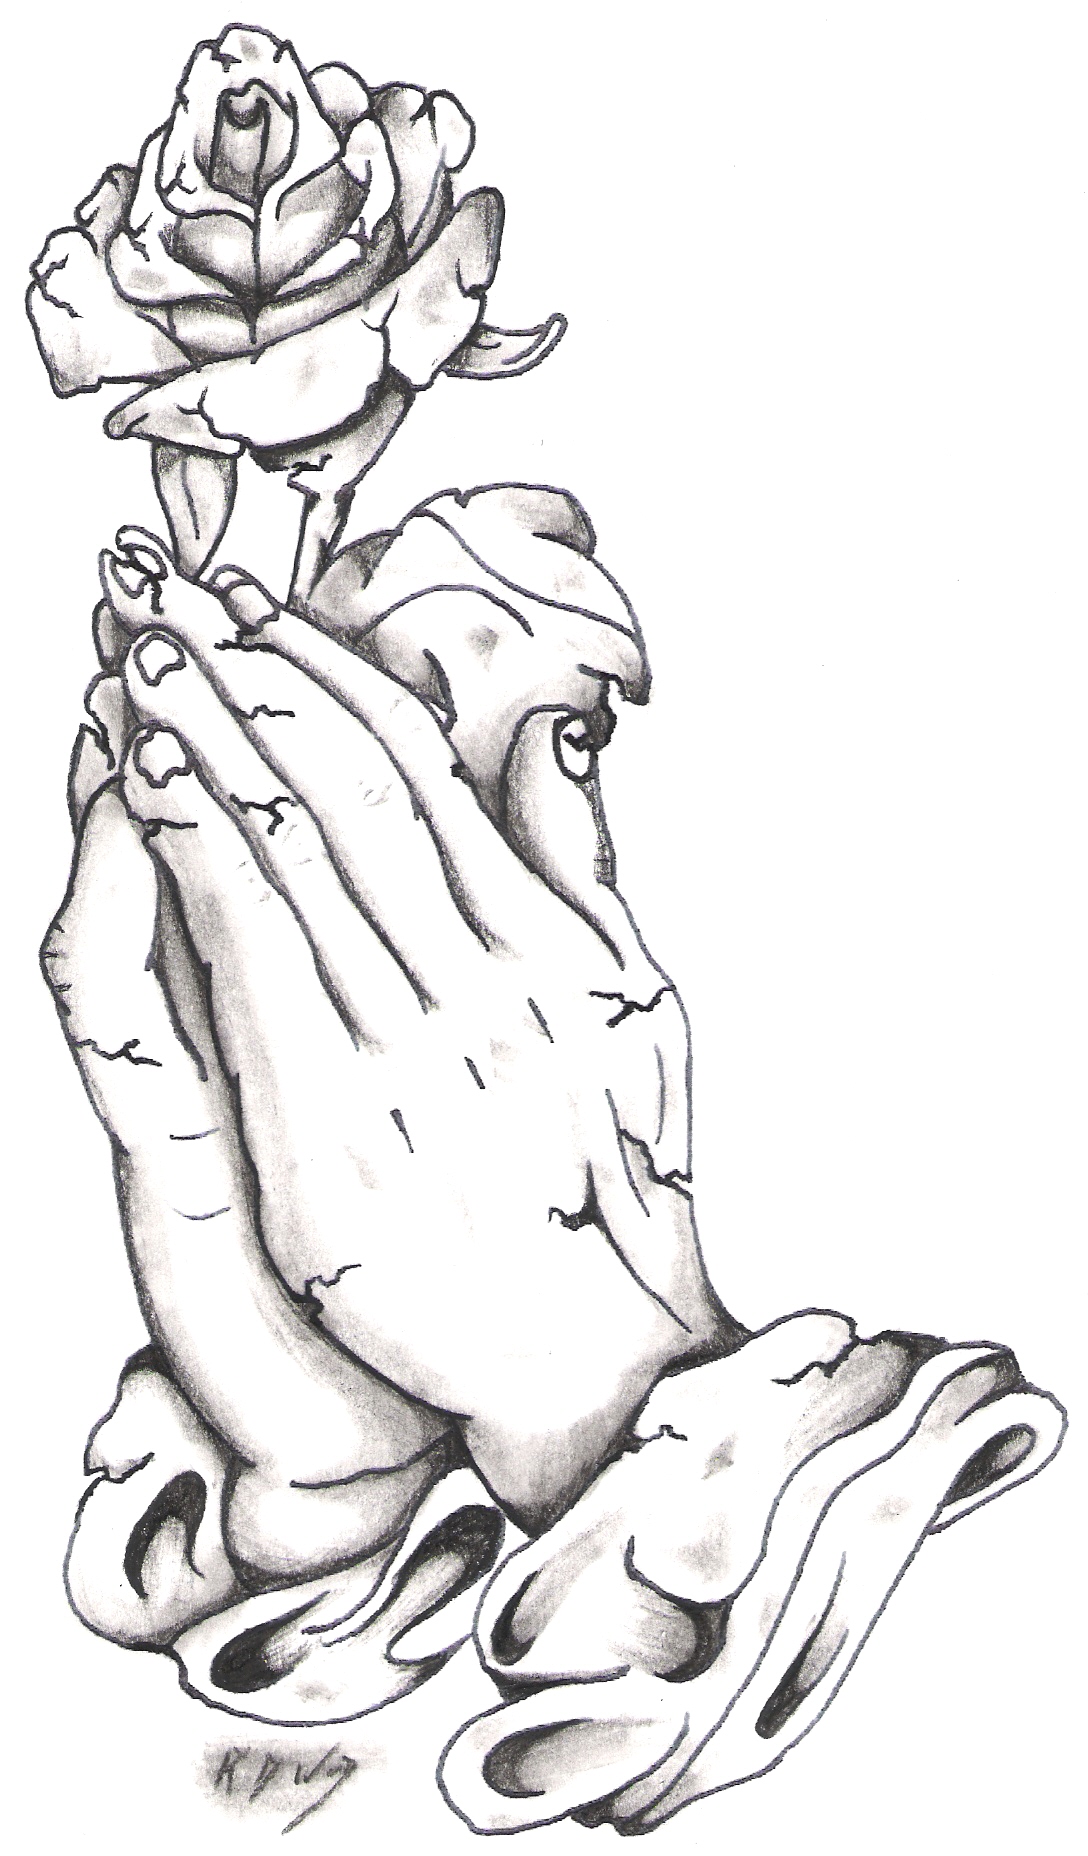 Stone Praying Hands And Rose By Bassplayer39 On Deviantart